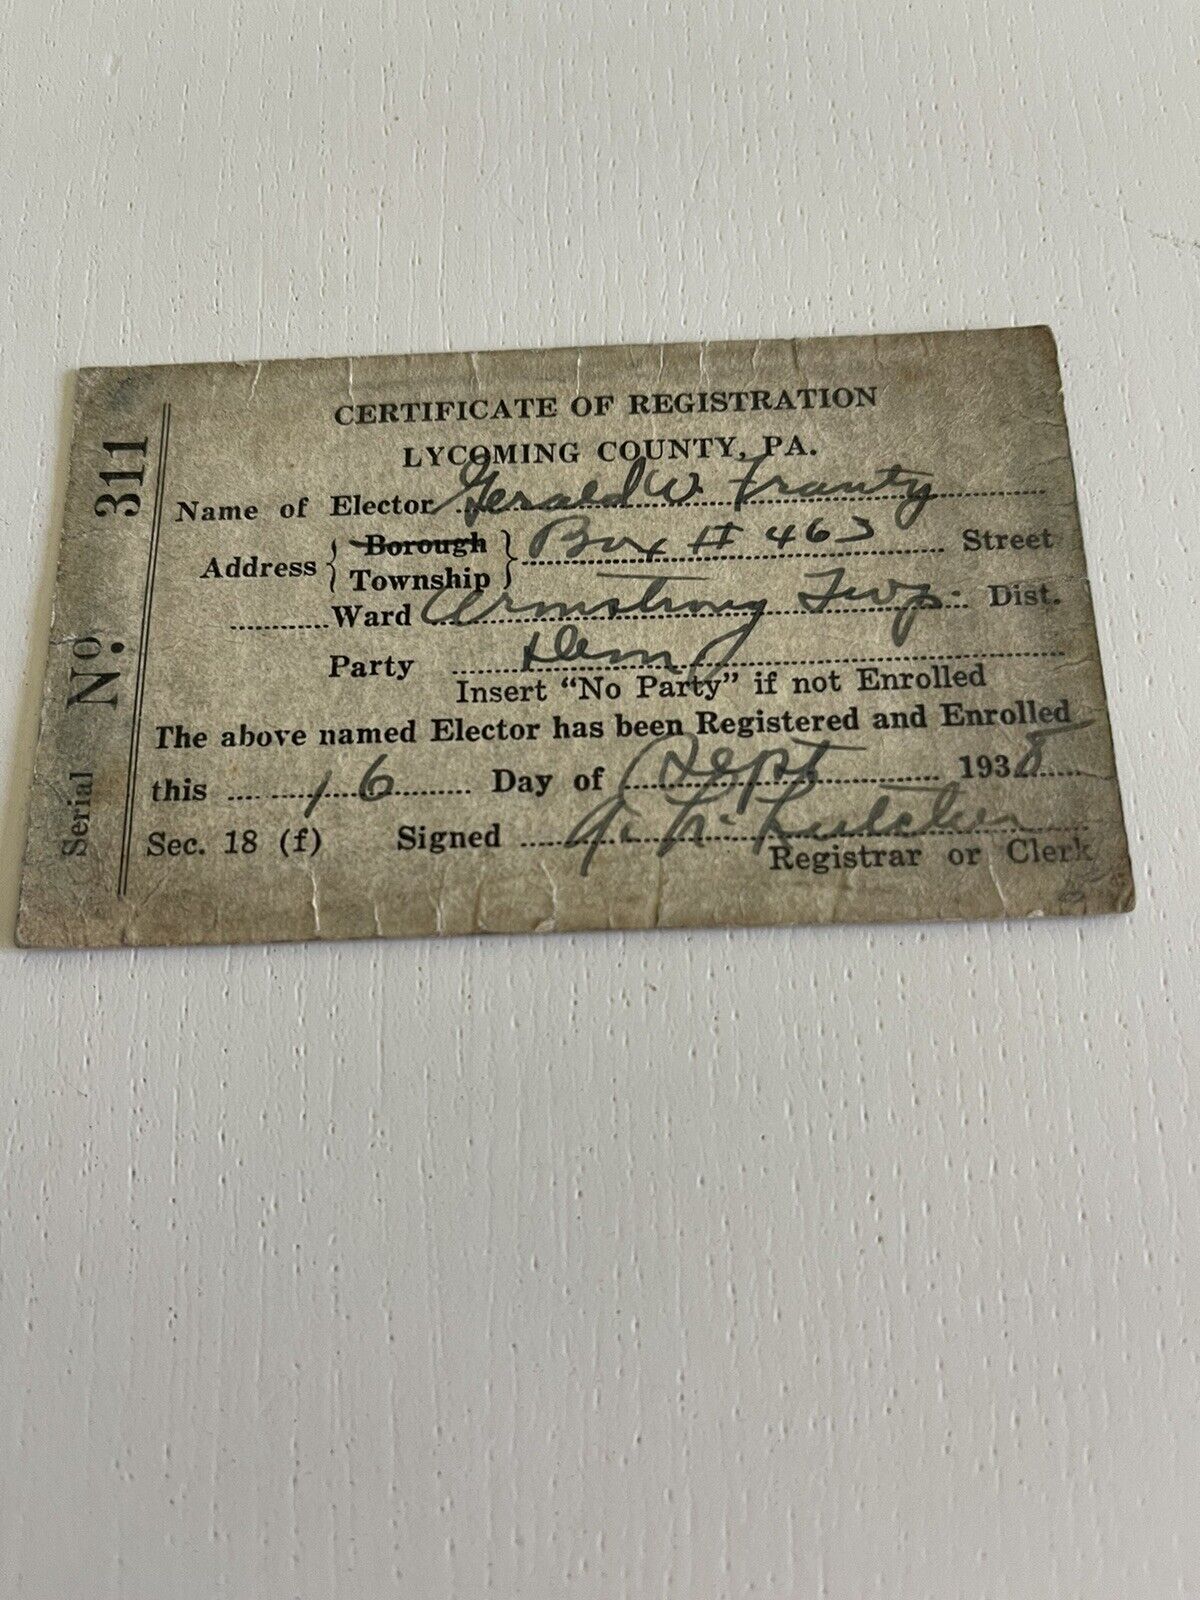 1938 Voter Registration Card Lycoming County, PA 